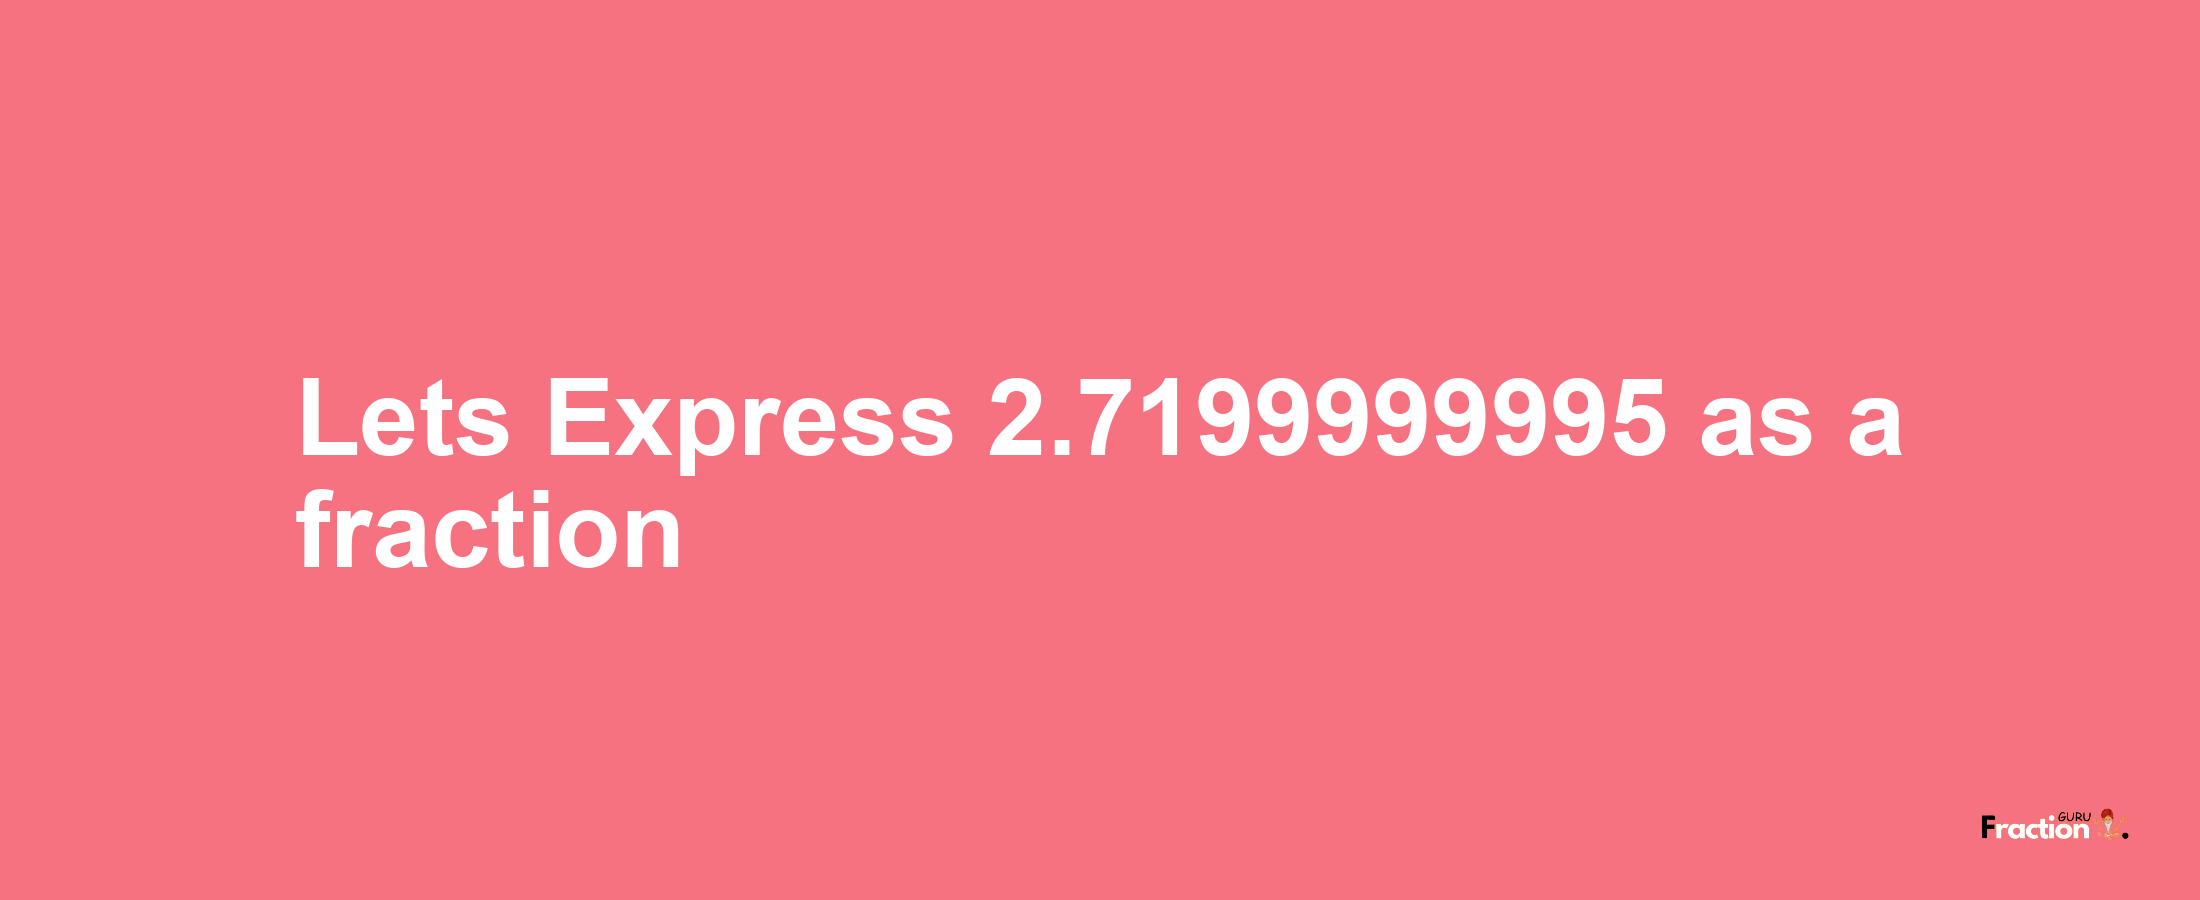 Lets Express 2.7199999995 as afraction